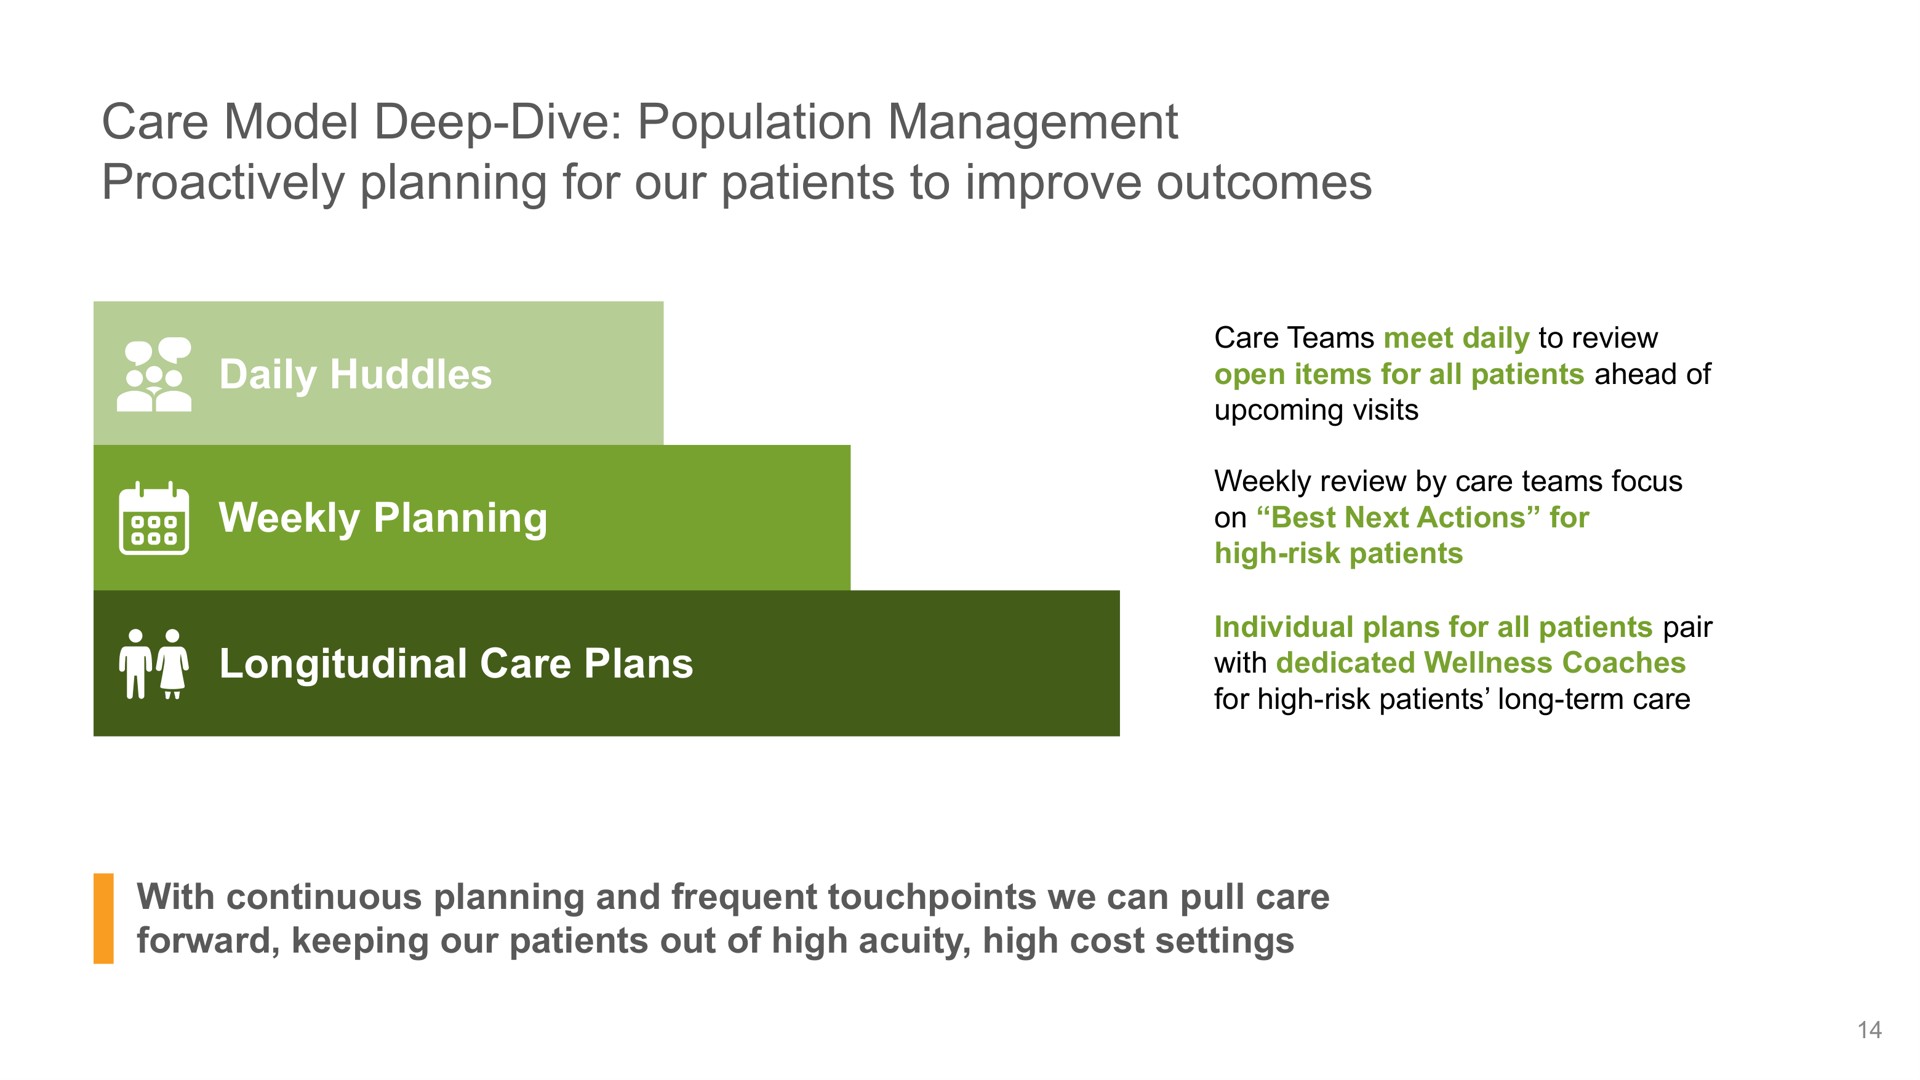 care model deep dive population management planning for our patients to improve outcomes | Oak Street Health